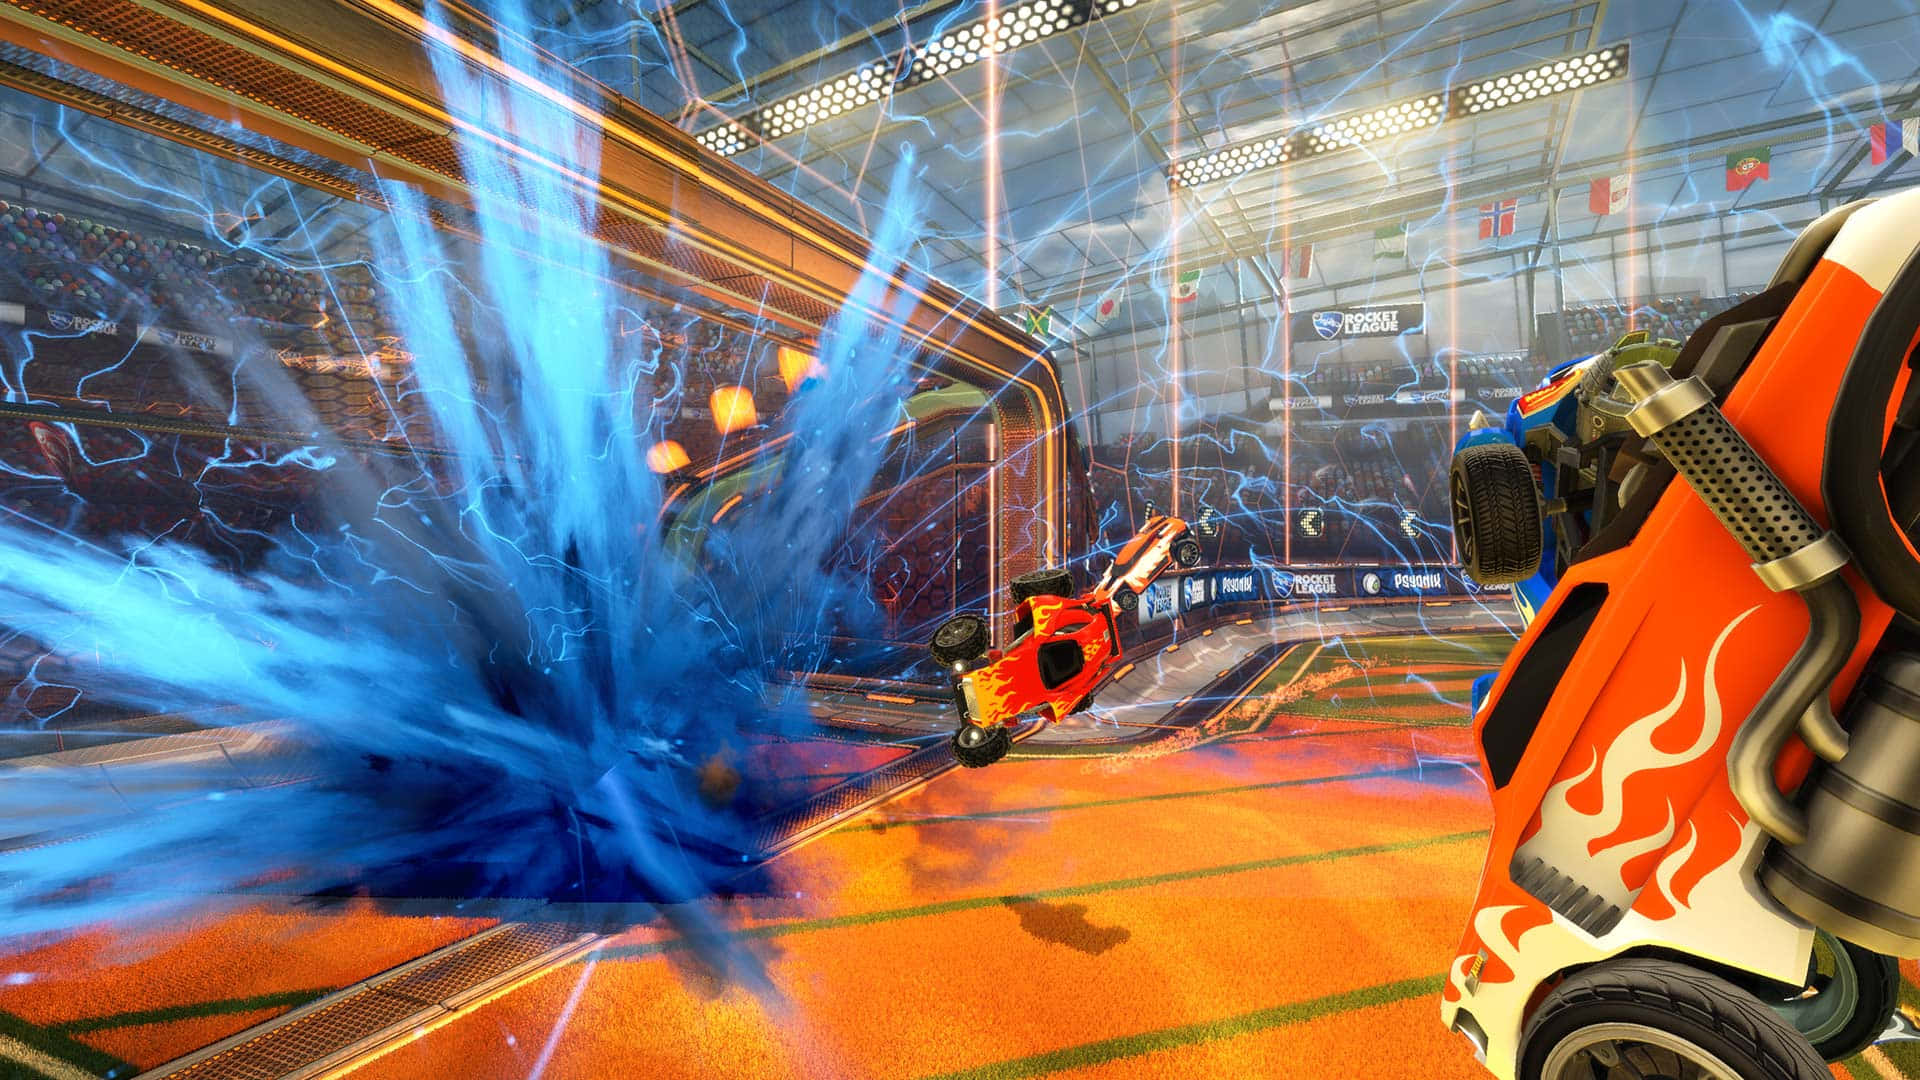 Blasting off in the high-octane game of Rocket League!